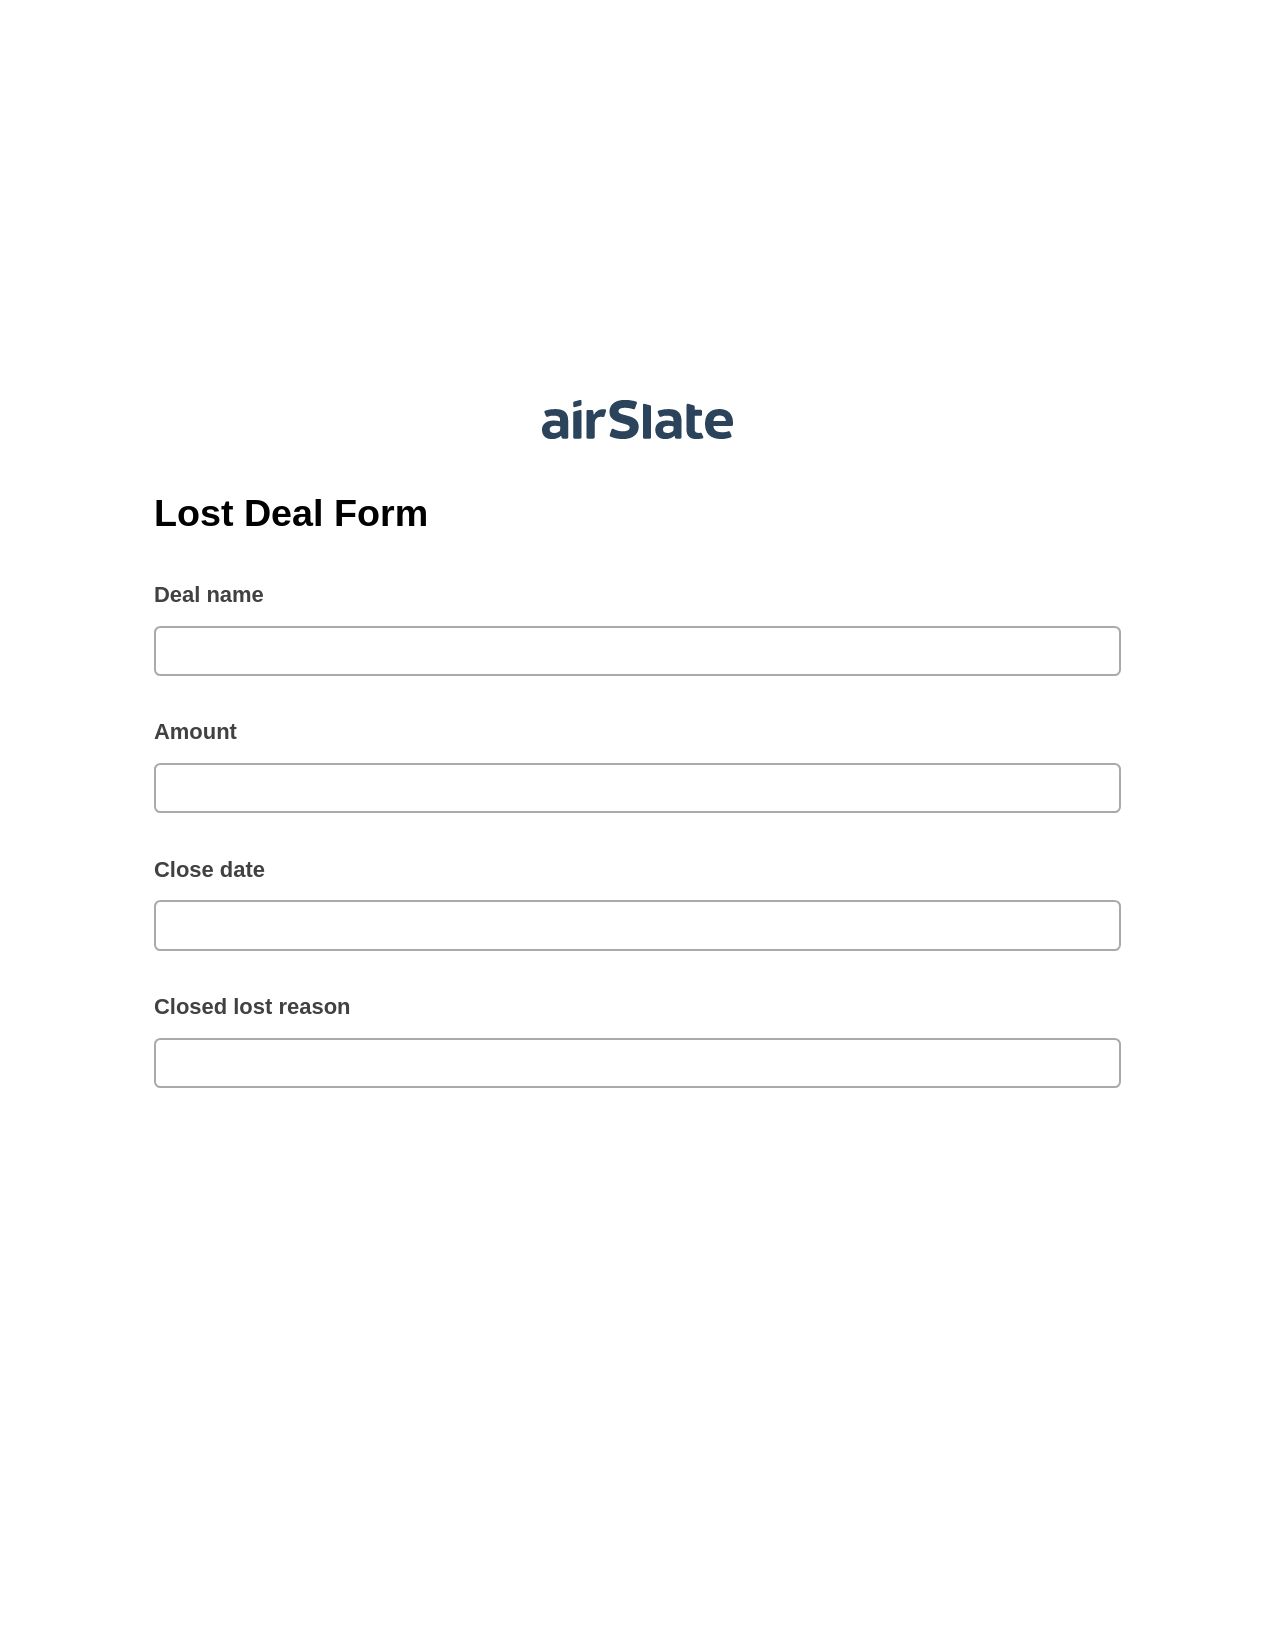 Lost Deal Form Pre-fill Dropdowns from Airtable, SendGrid send Campaign bot, Archive to Box Bot